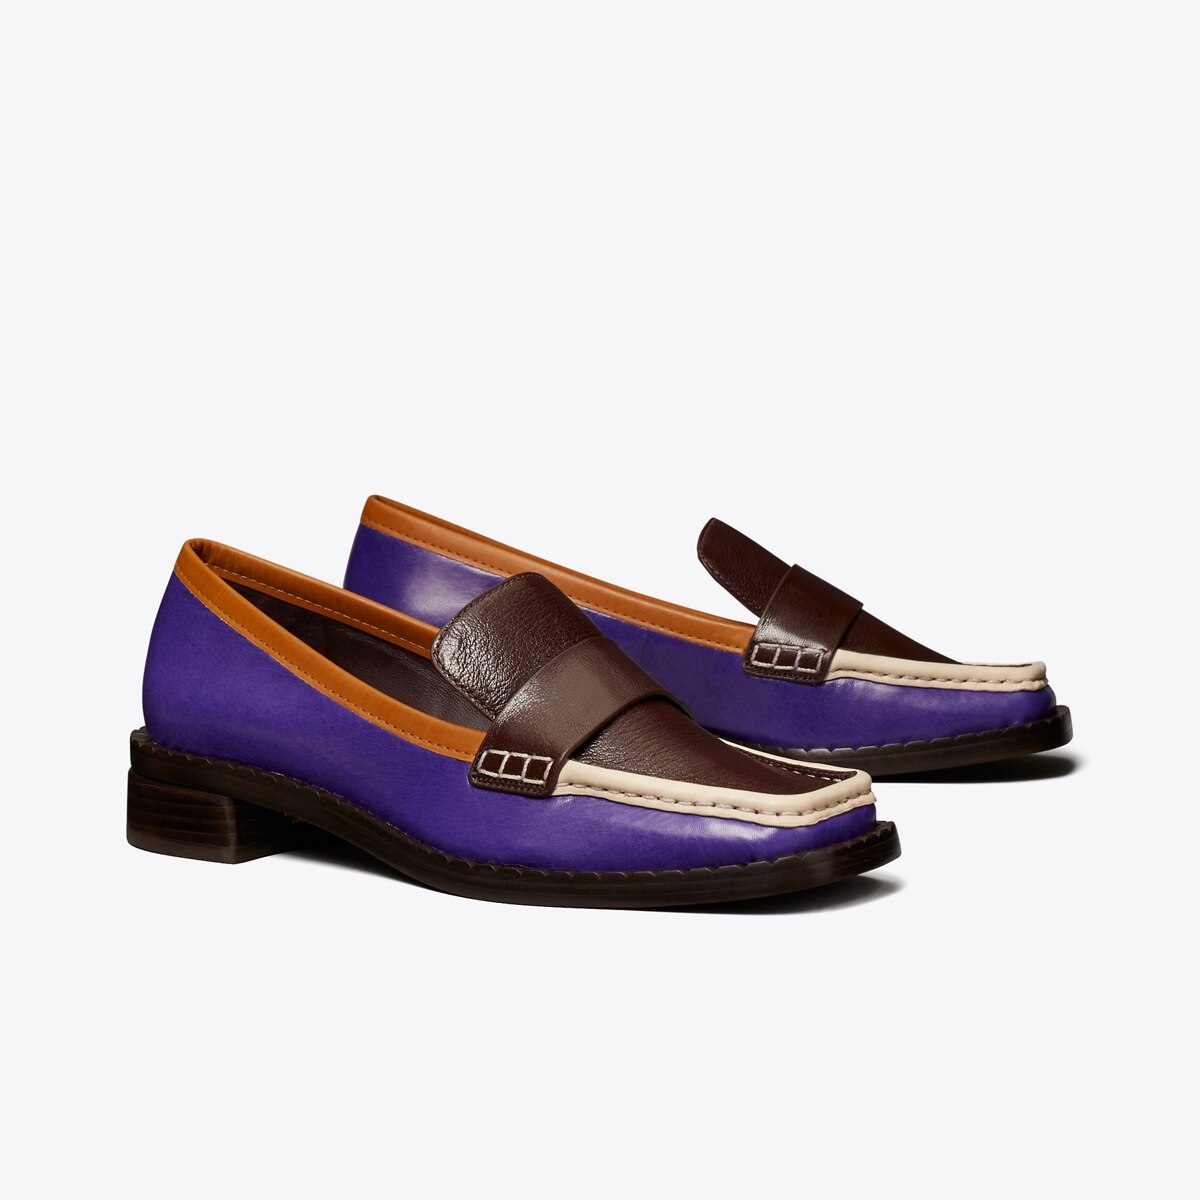 '70s Square Loafer : Women's Designer Flats | Tory Burch